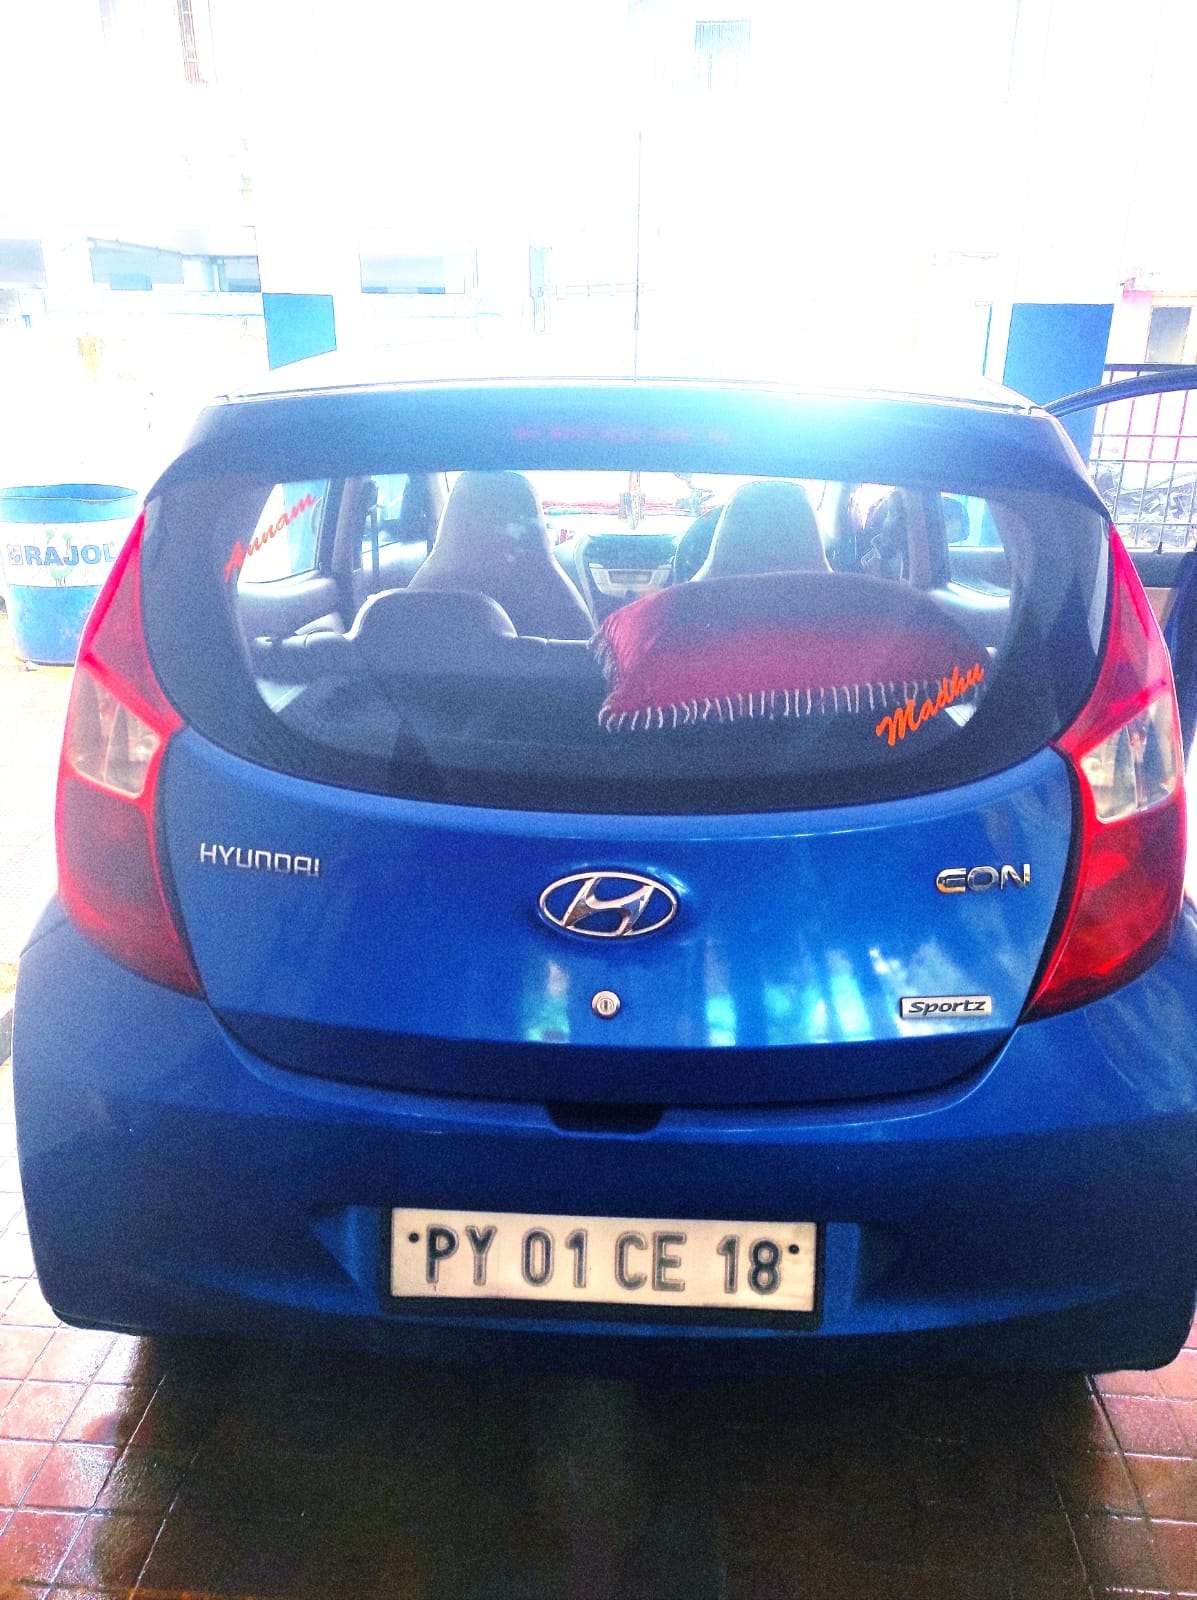 3270-for-sale-Hyundai-Eon-Petrol-Second-Owner-2014-PY-registered-rs-240000